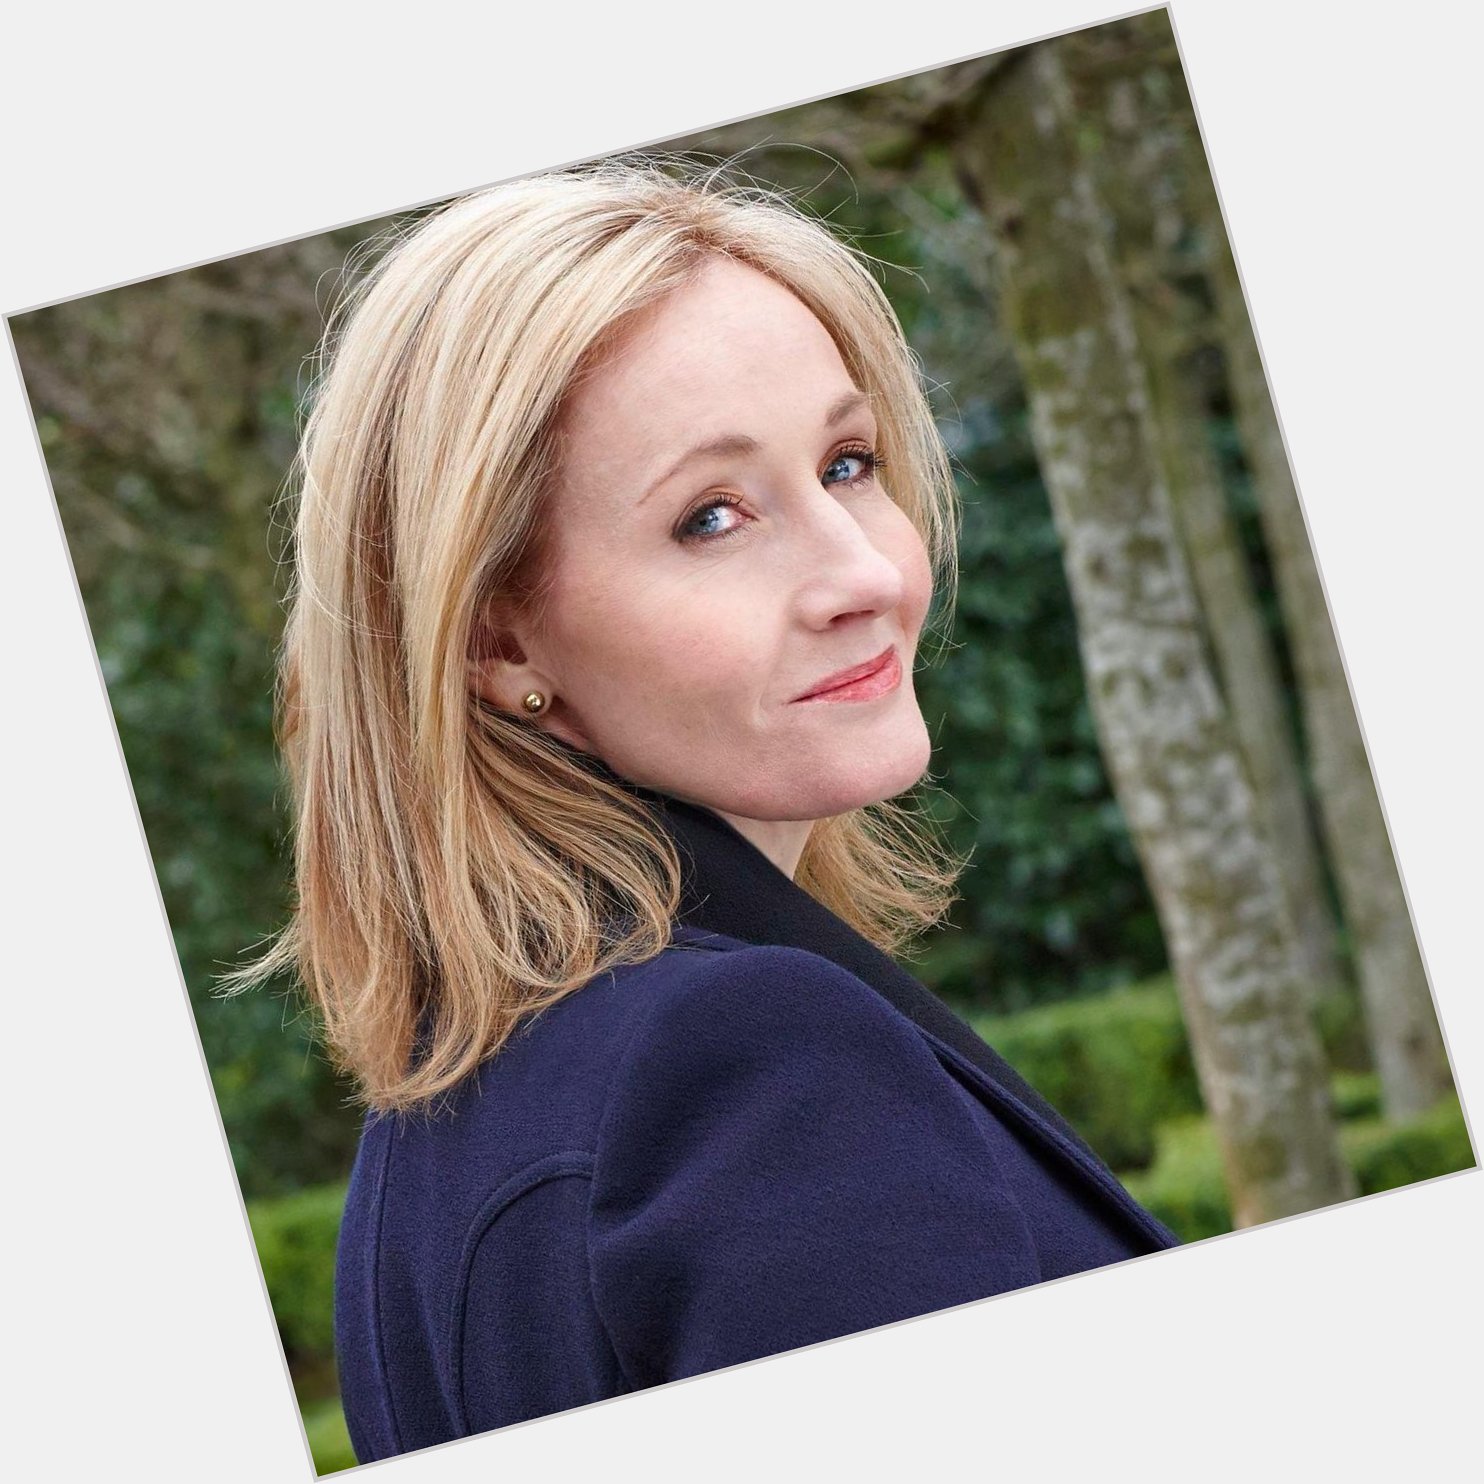 Happy Birthday J.K. Rowling! All the best and good health!  